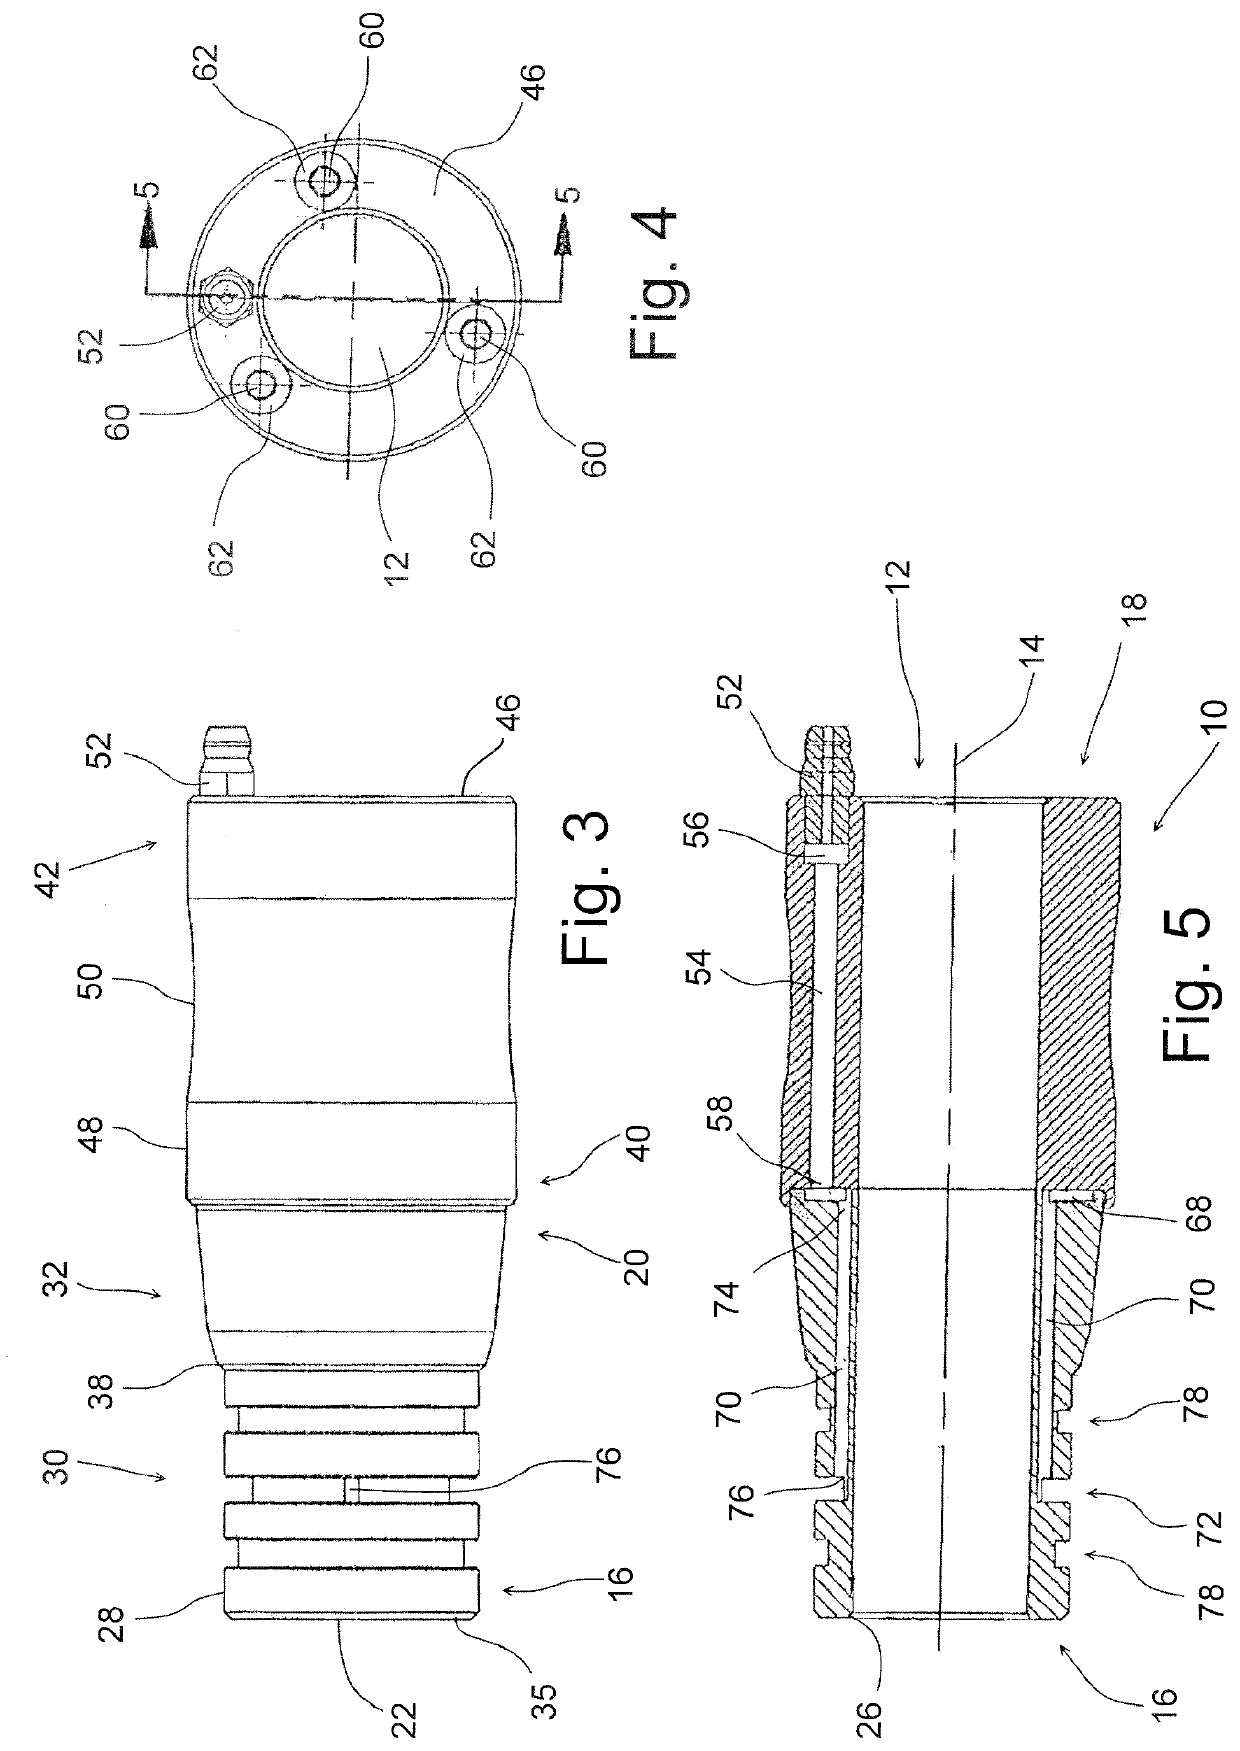 Over an axle grease tool for repacking wheel bearing with grease, and method of using same